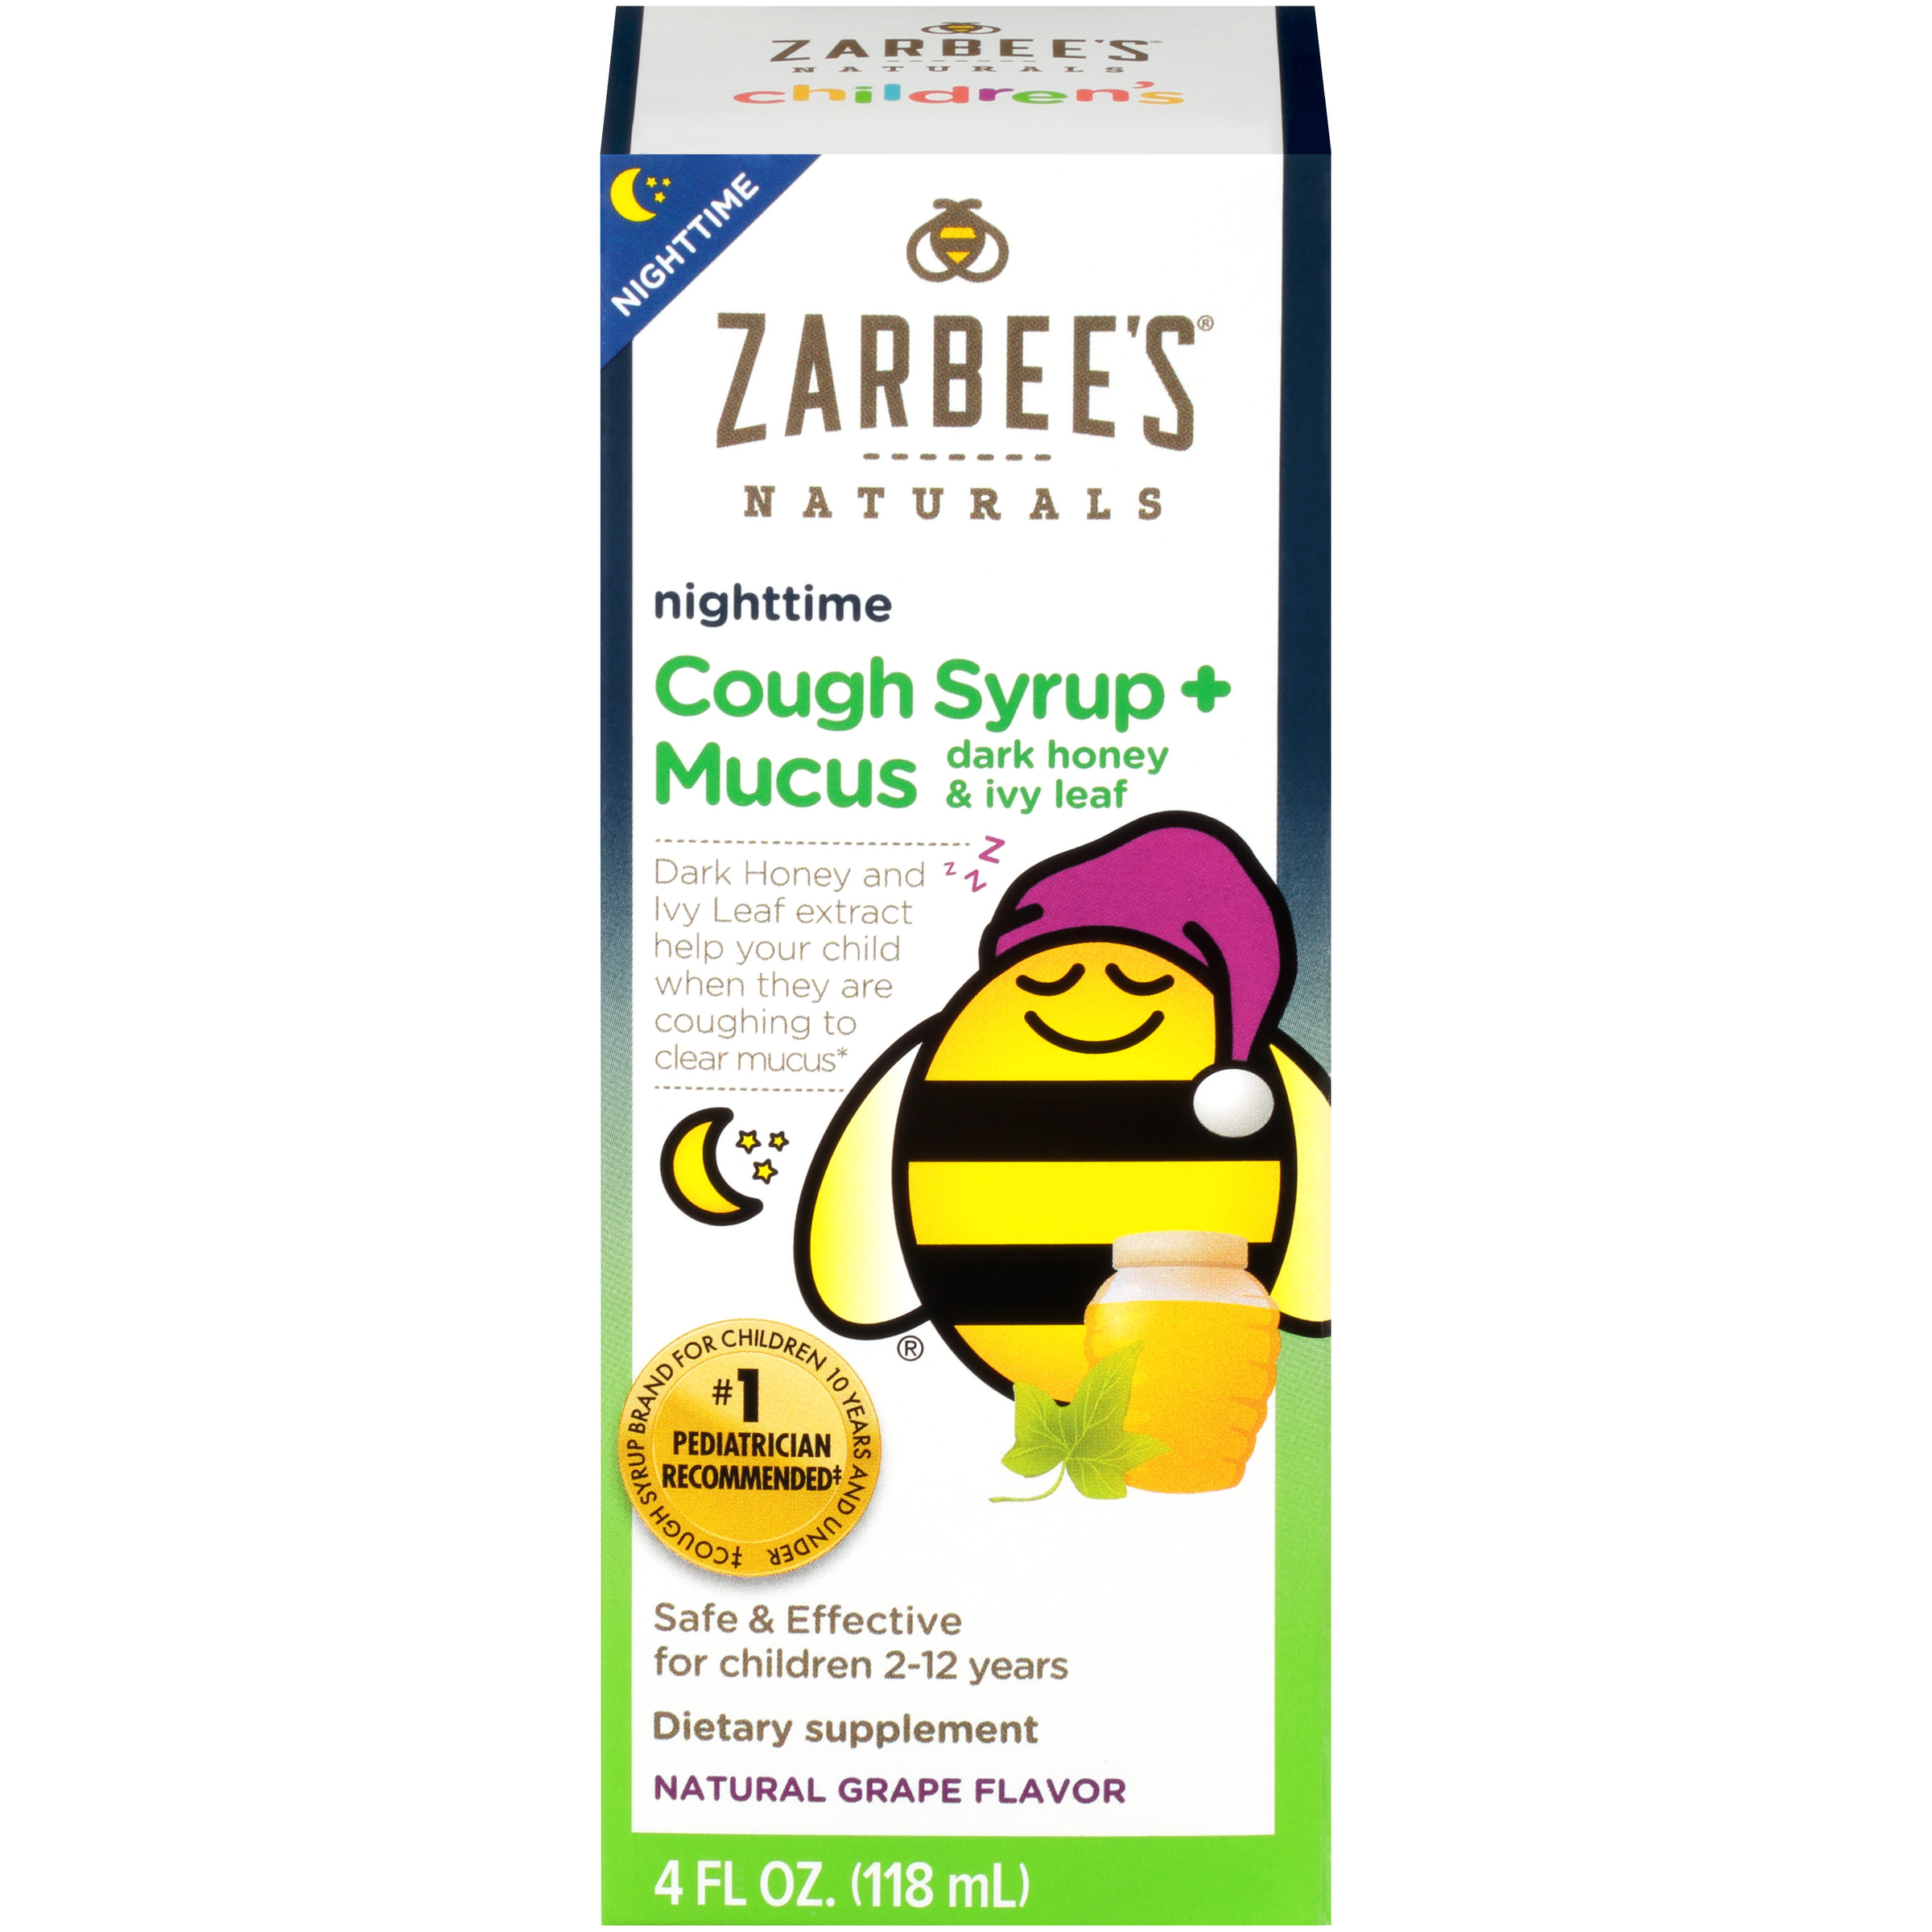 Zarbee's Naturals Children's Cough Syrup + Mucus Nighttime, Grape, 4 fl oz - image 1 of 8